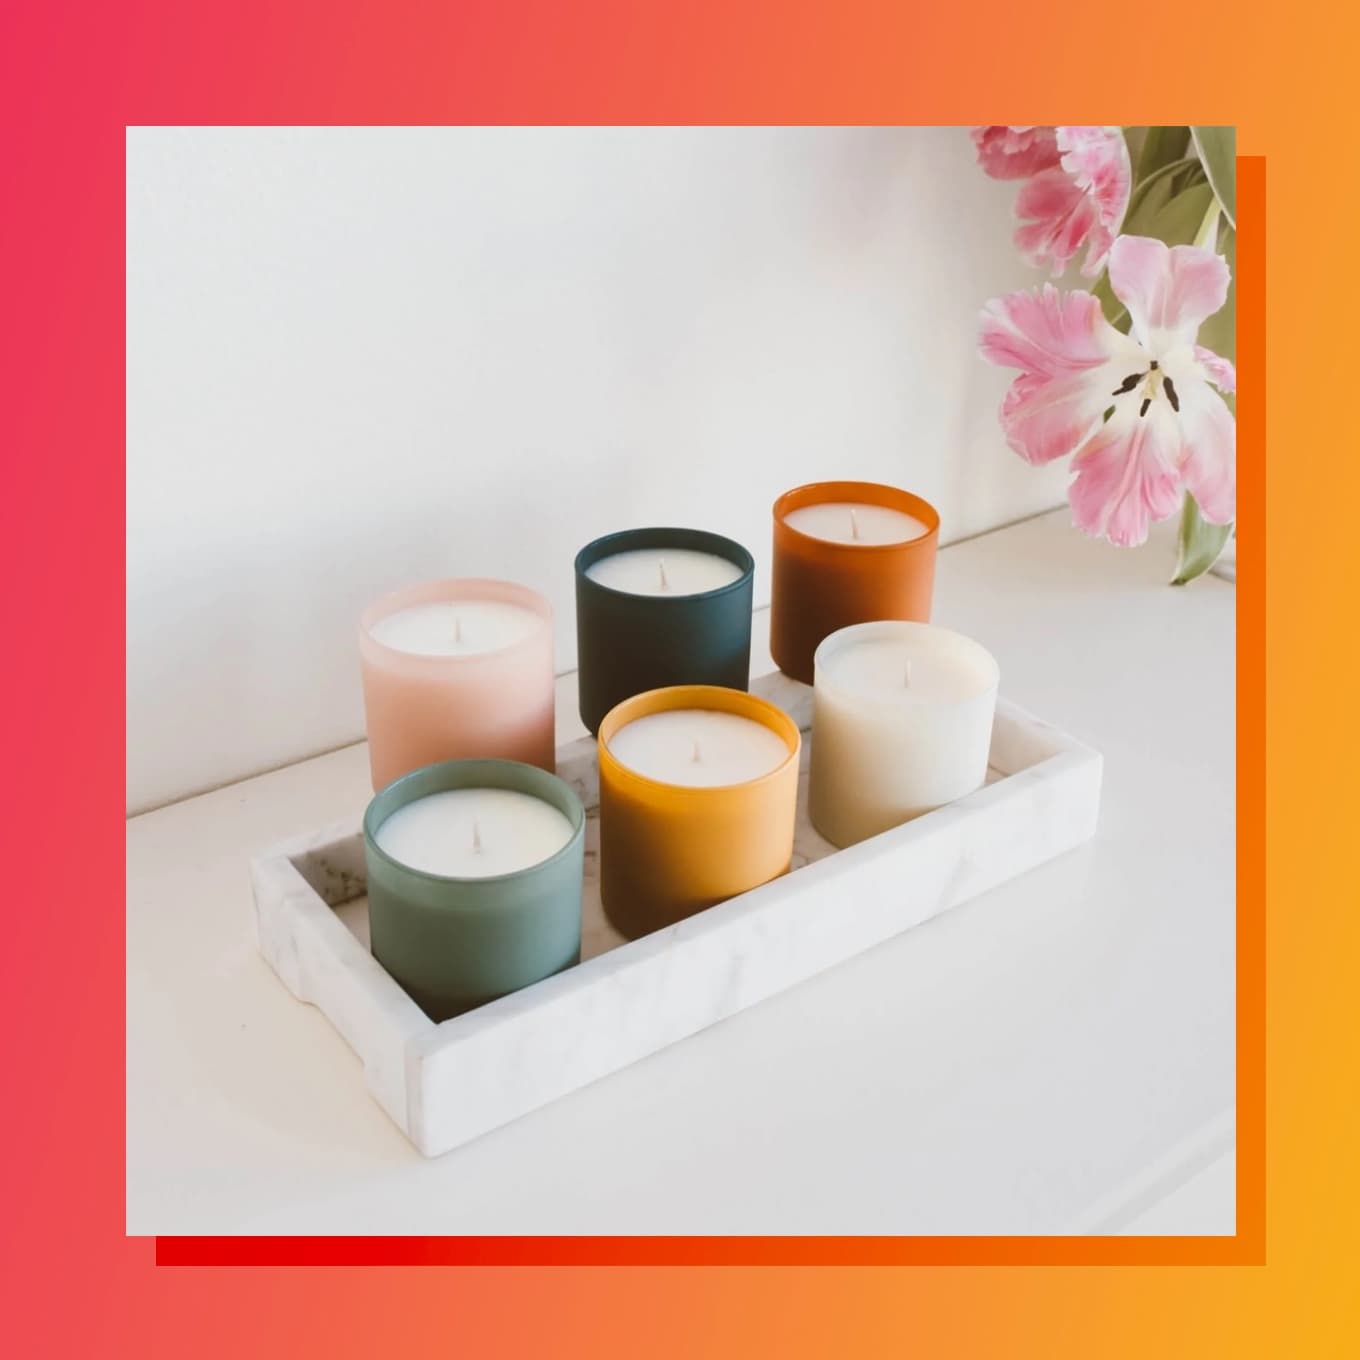 Six candles in colorful vessels lined up next to a pink flower